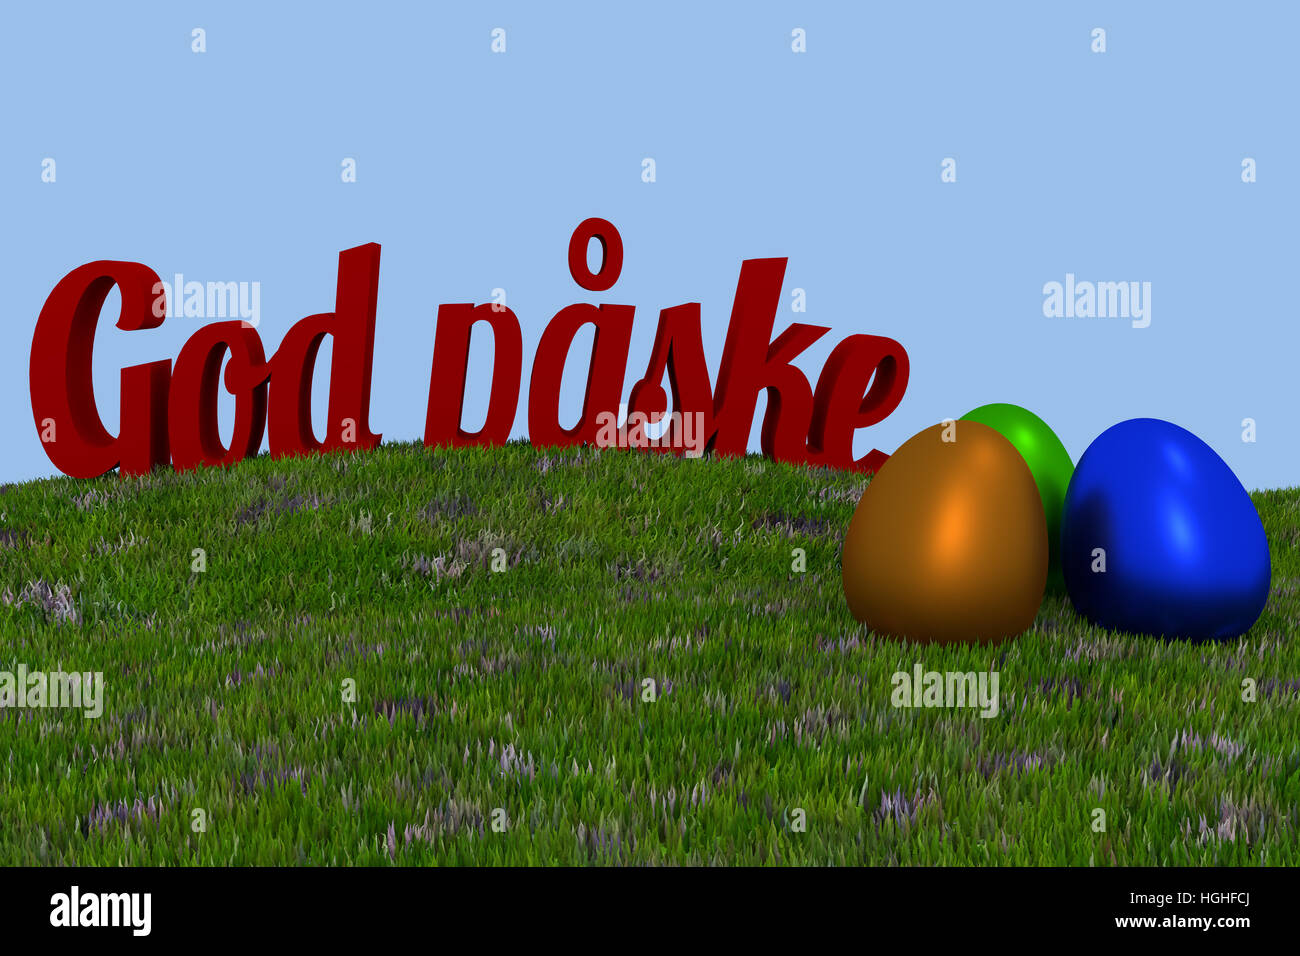 God paske, Danish Happy Easter. Green grass with the words Happy Easter and three colored eggs Stock Photo